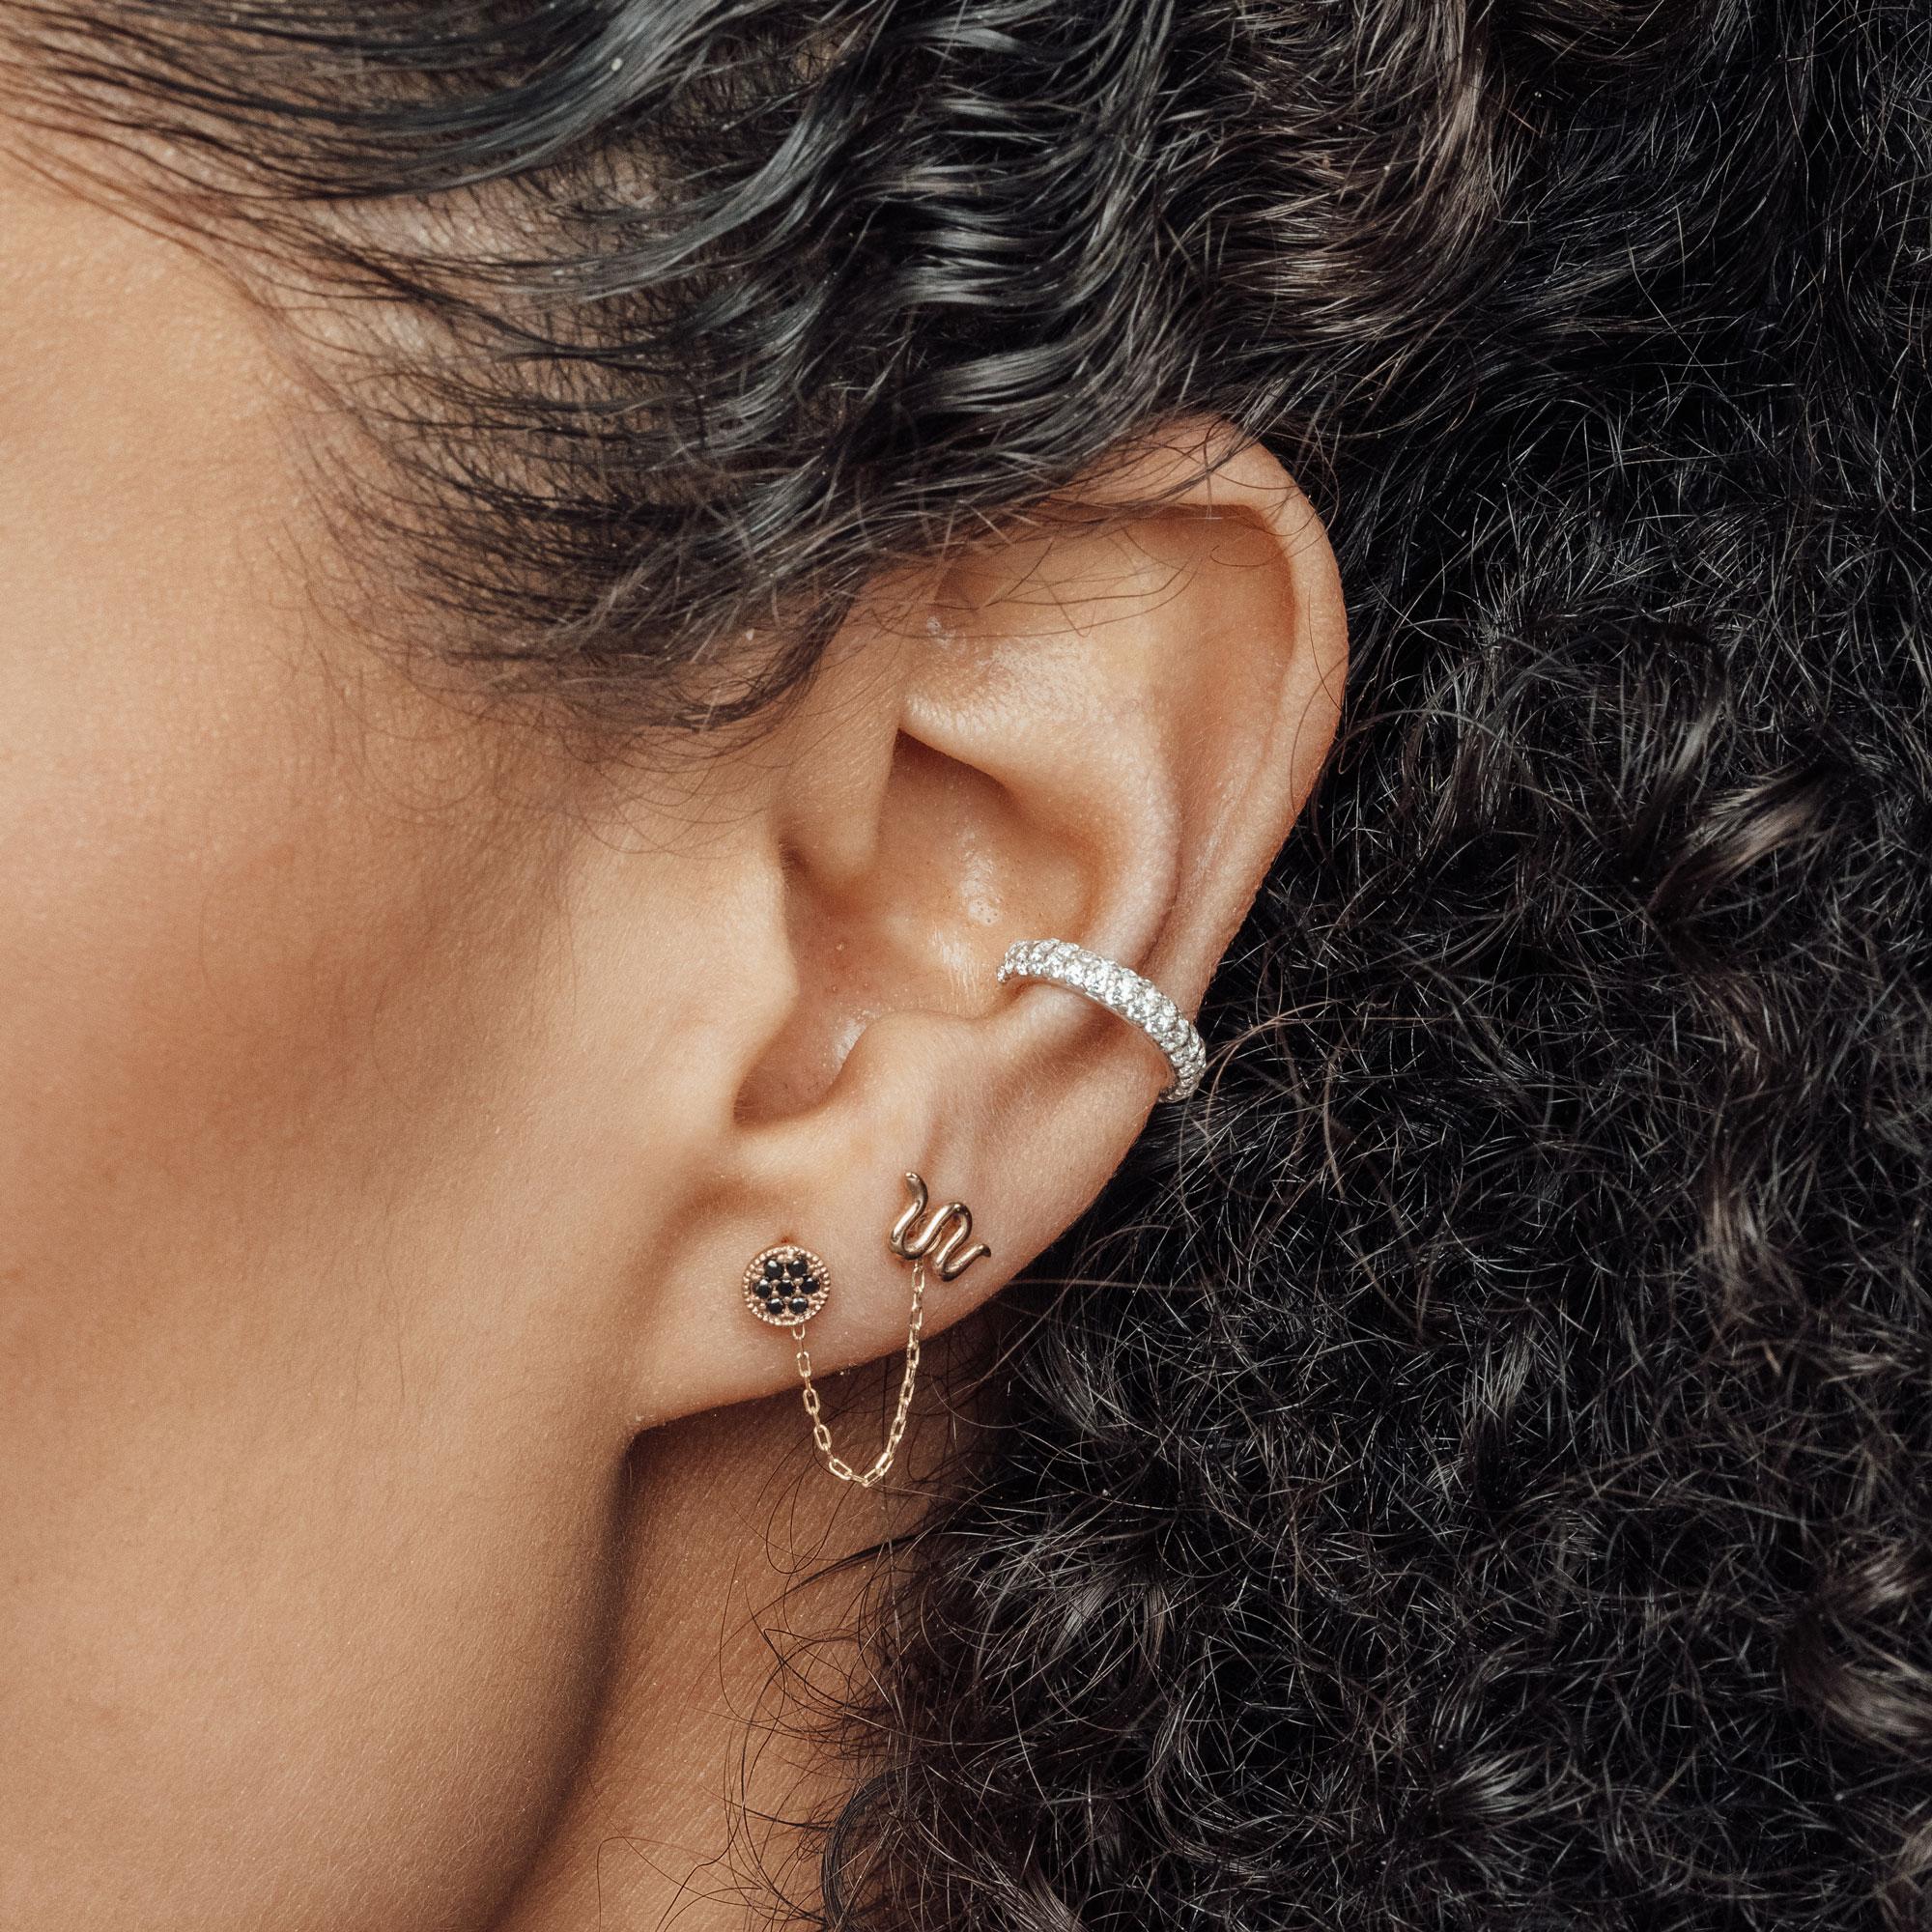 For the gooddess in you. Snakes symbolize rebirth, creativity and stepping into a whole new version of yourself. Wearing this gold stud earrings will encourage your growth and push you beyond your limits. Catch you on the other side, gorgeous